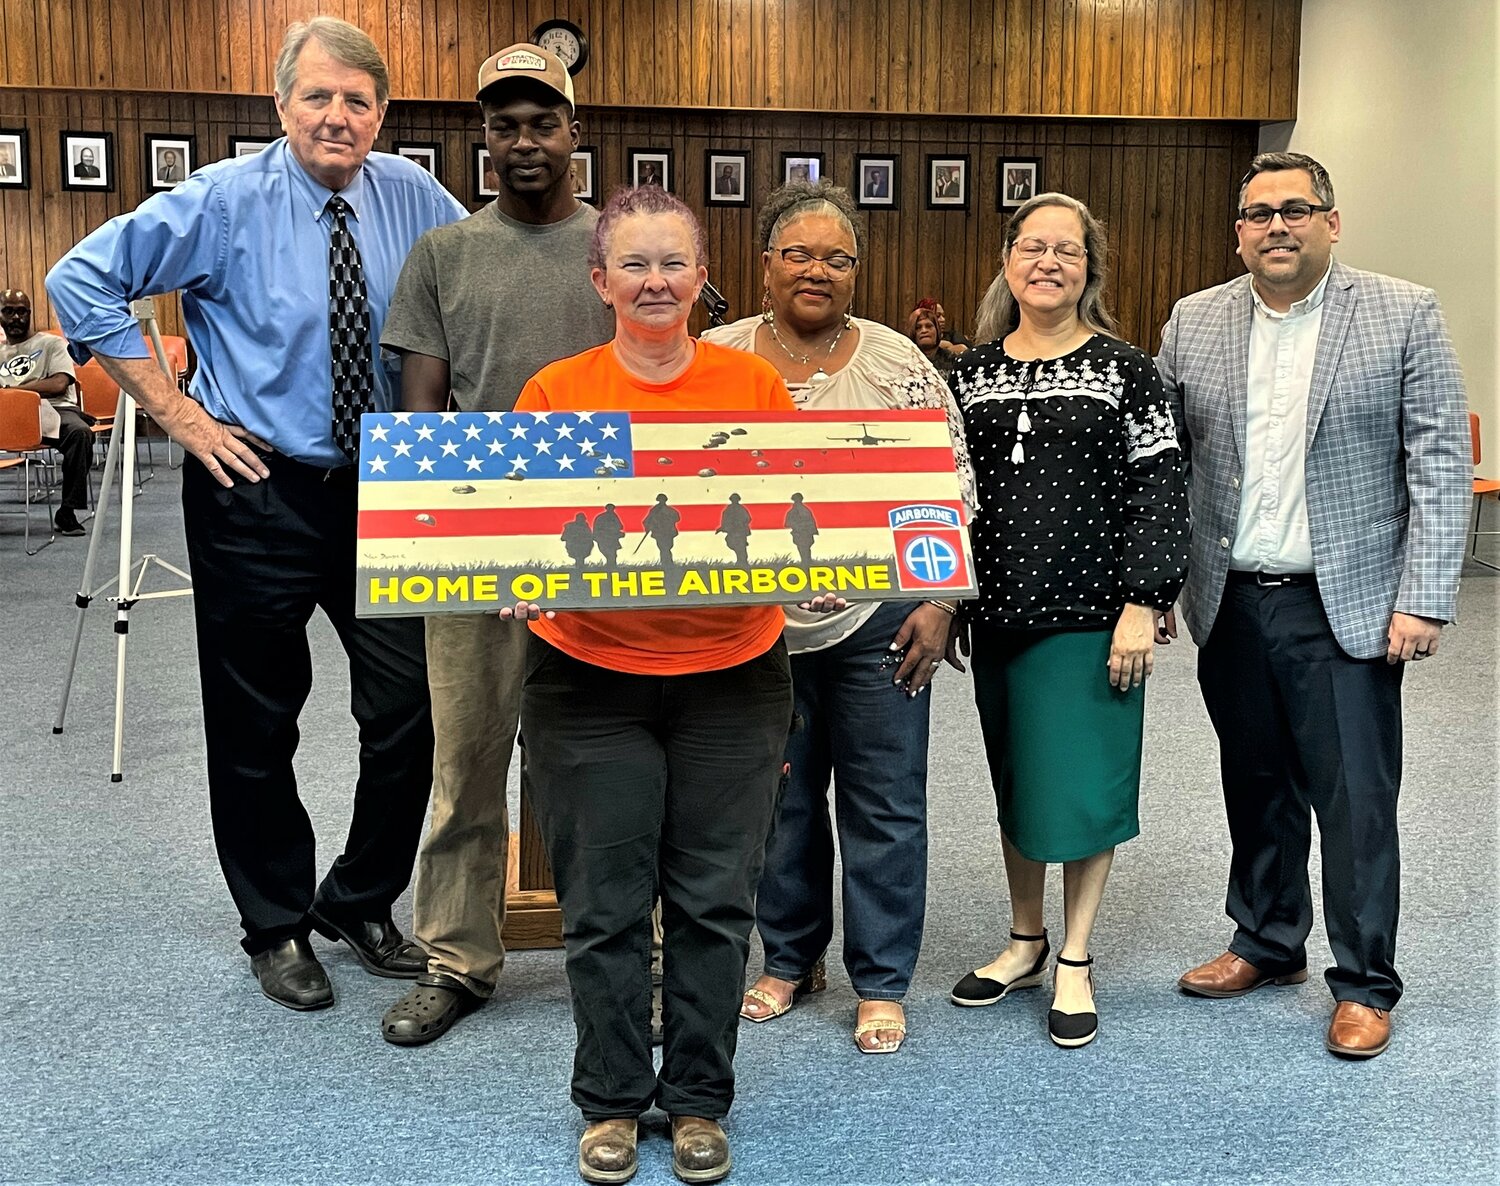 A mural showing support for the military will be the subject of a mural on Main Street in Spring Lake. From left are David Dickerhoff;; William Bryant; town Stormwater Administrator Deanna Rosario; committee Chair Fredricka Sutherland; Vice Chair Cynthia Wilt, and Alderman Raul Palacio